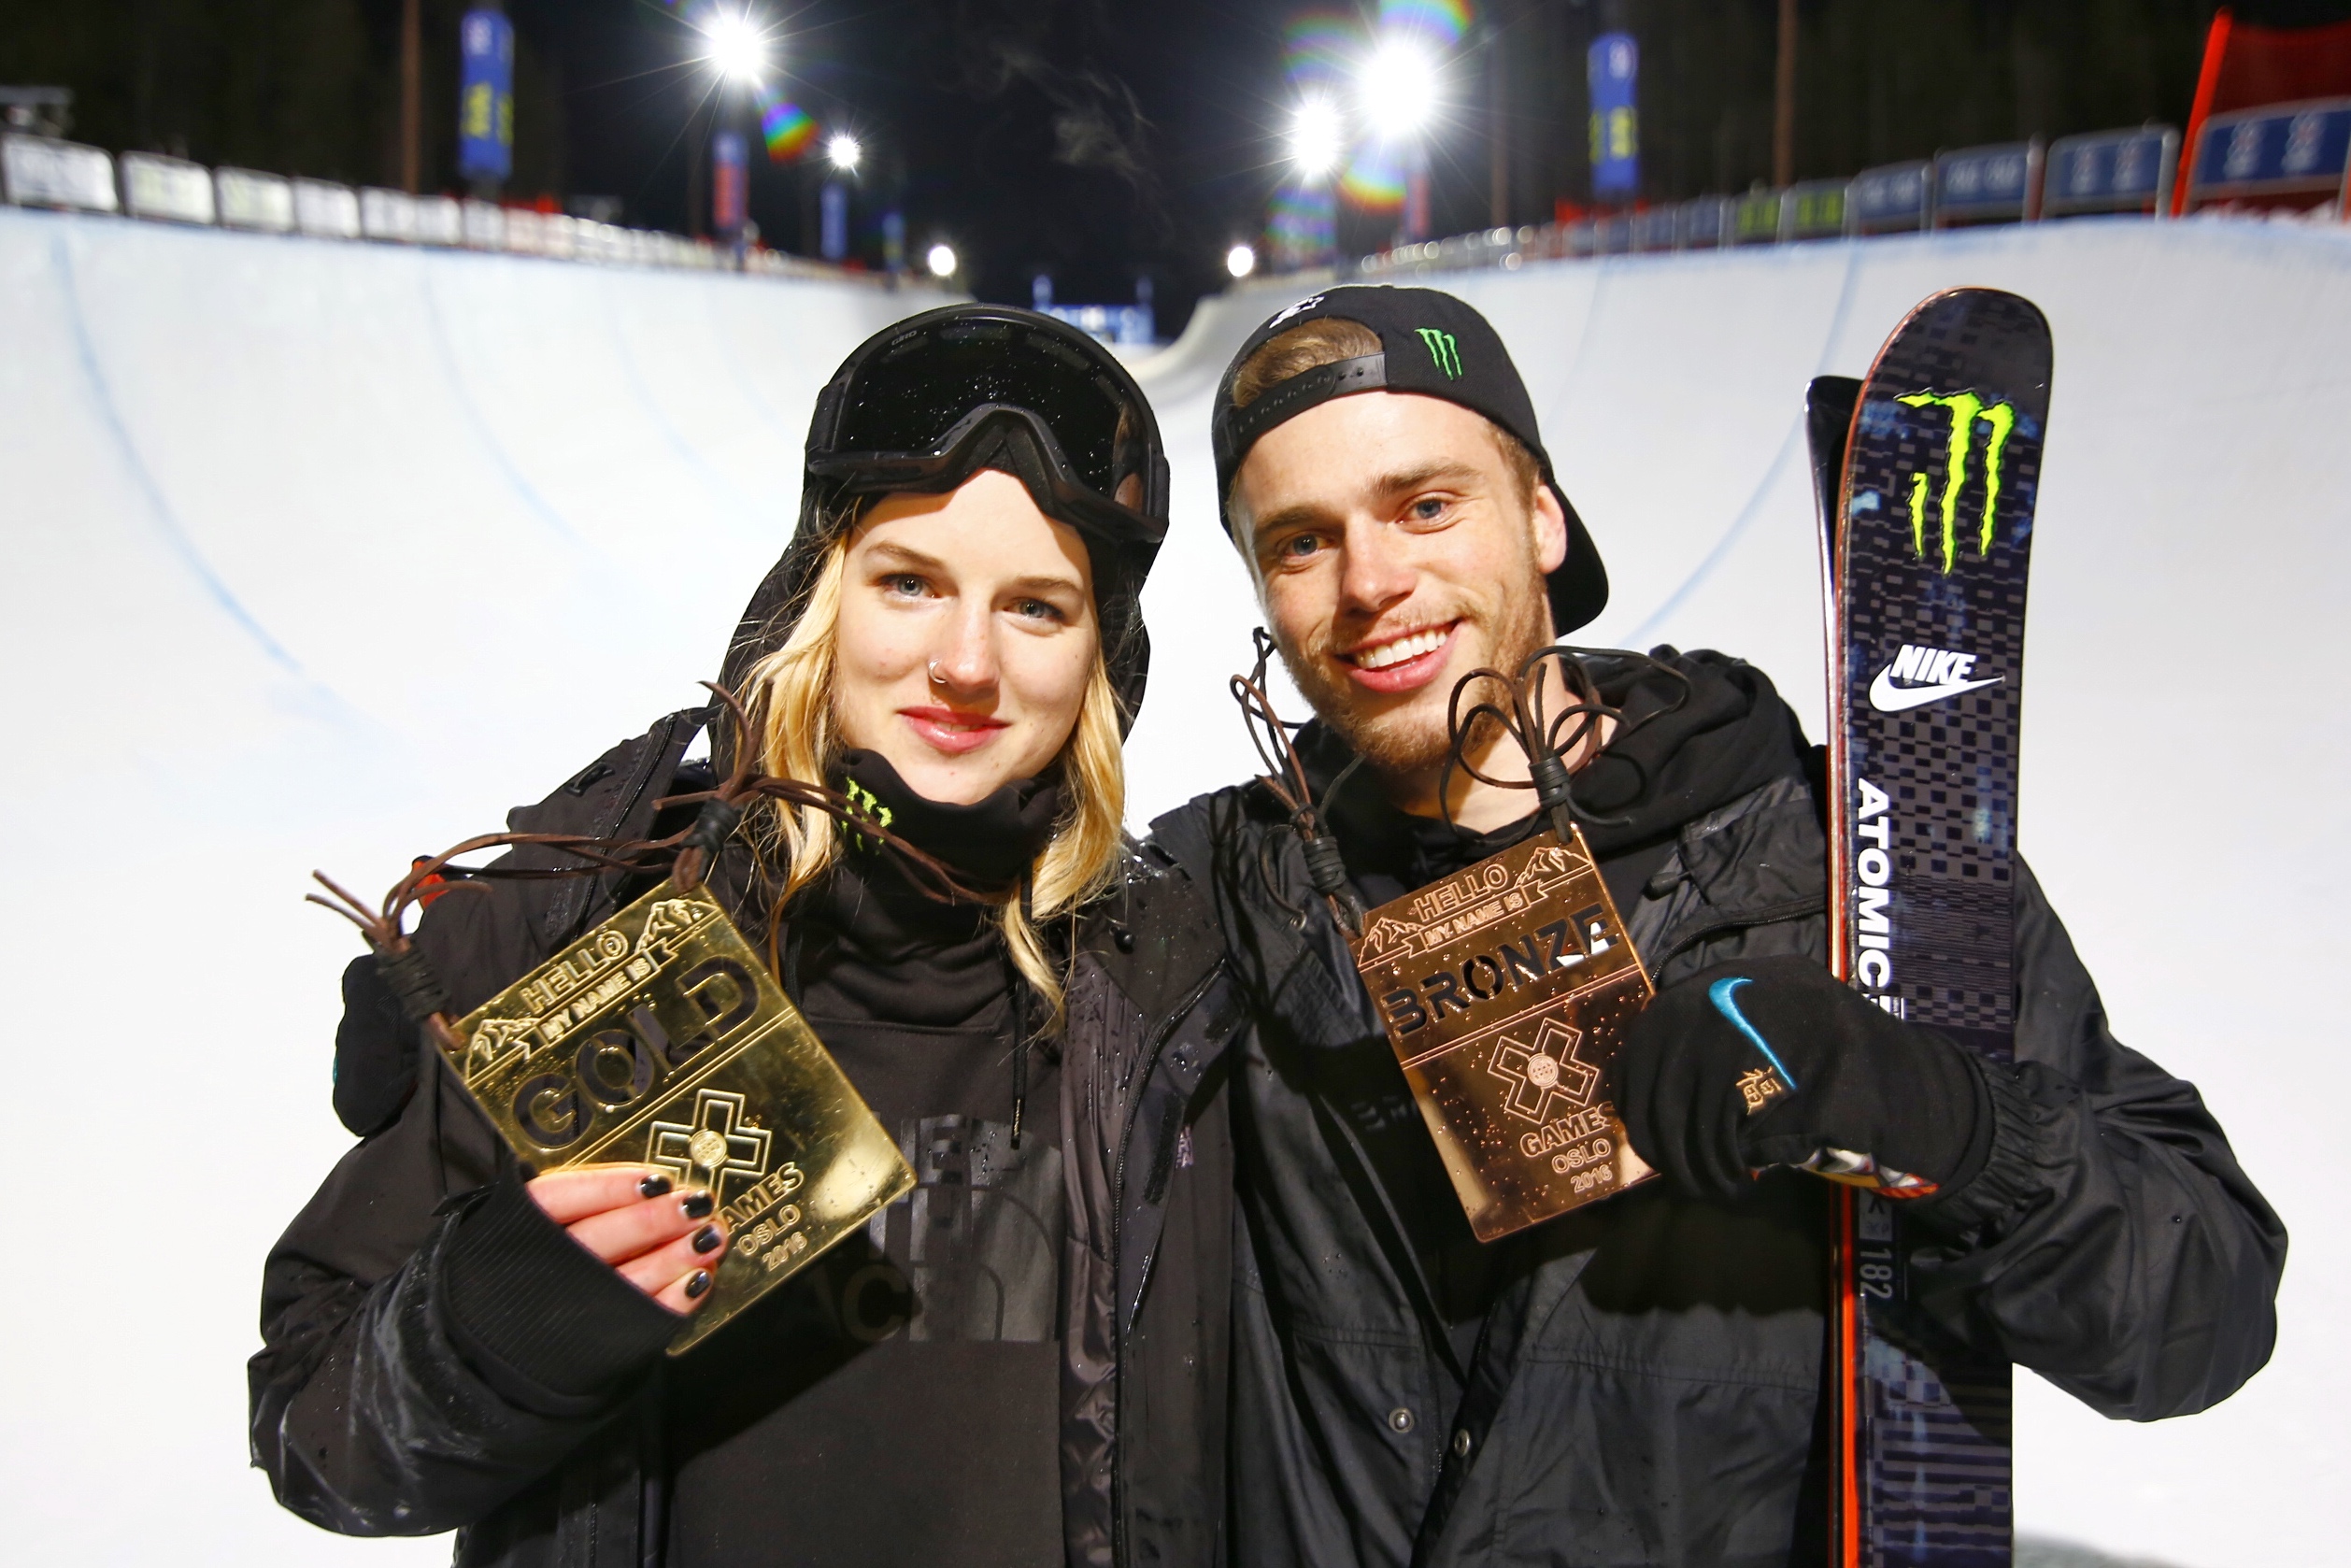 Monster Energy's Cassie Sharpe Takes Gold and Gus Kenworthy Takes Bronze in Ski SuperPipe at X Games Oslo 2016